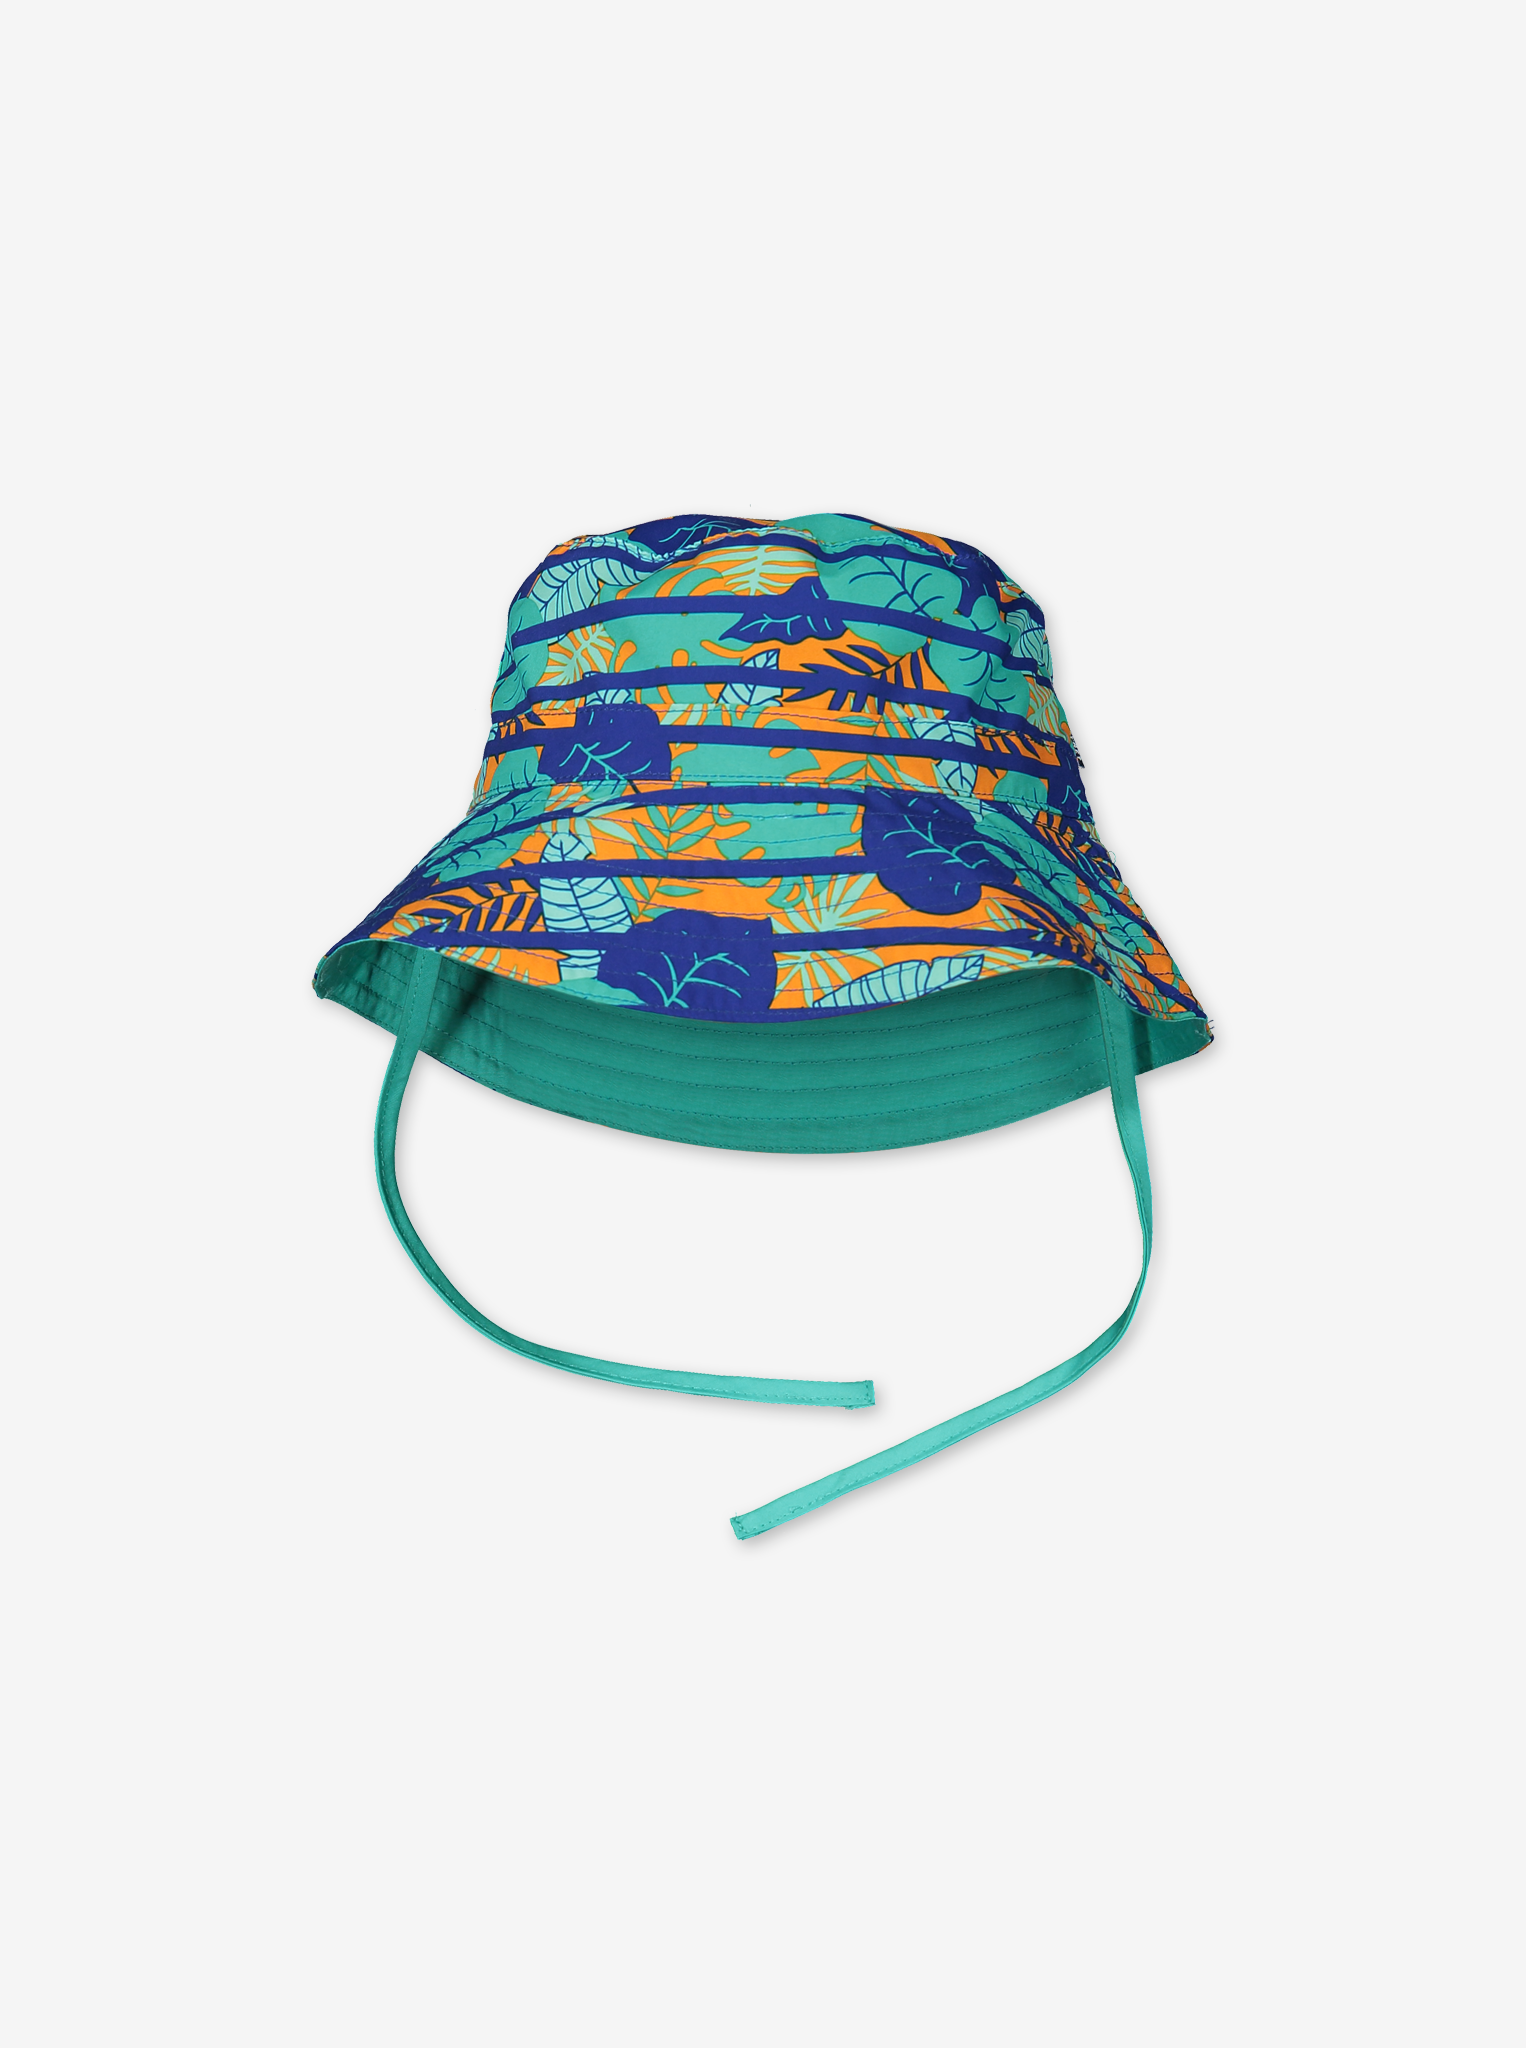 Reversible sun hat with UV protection